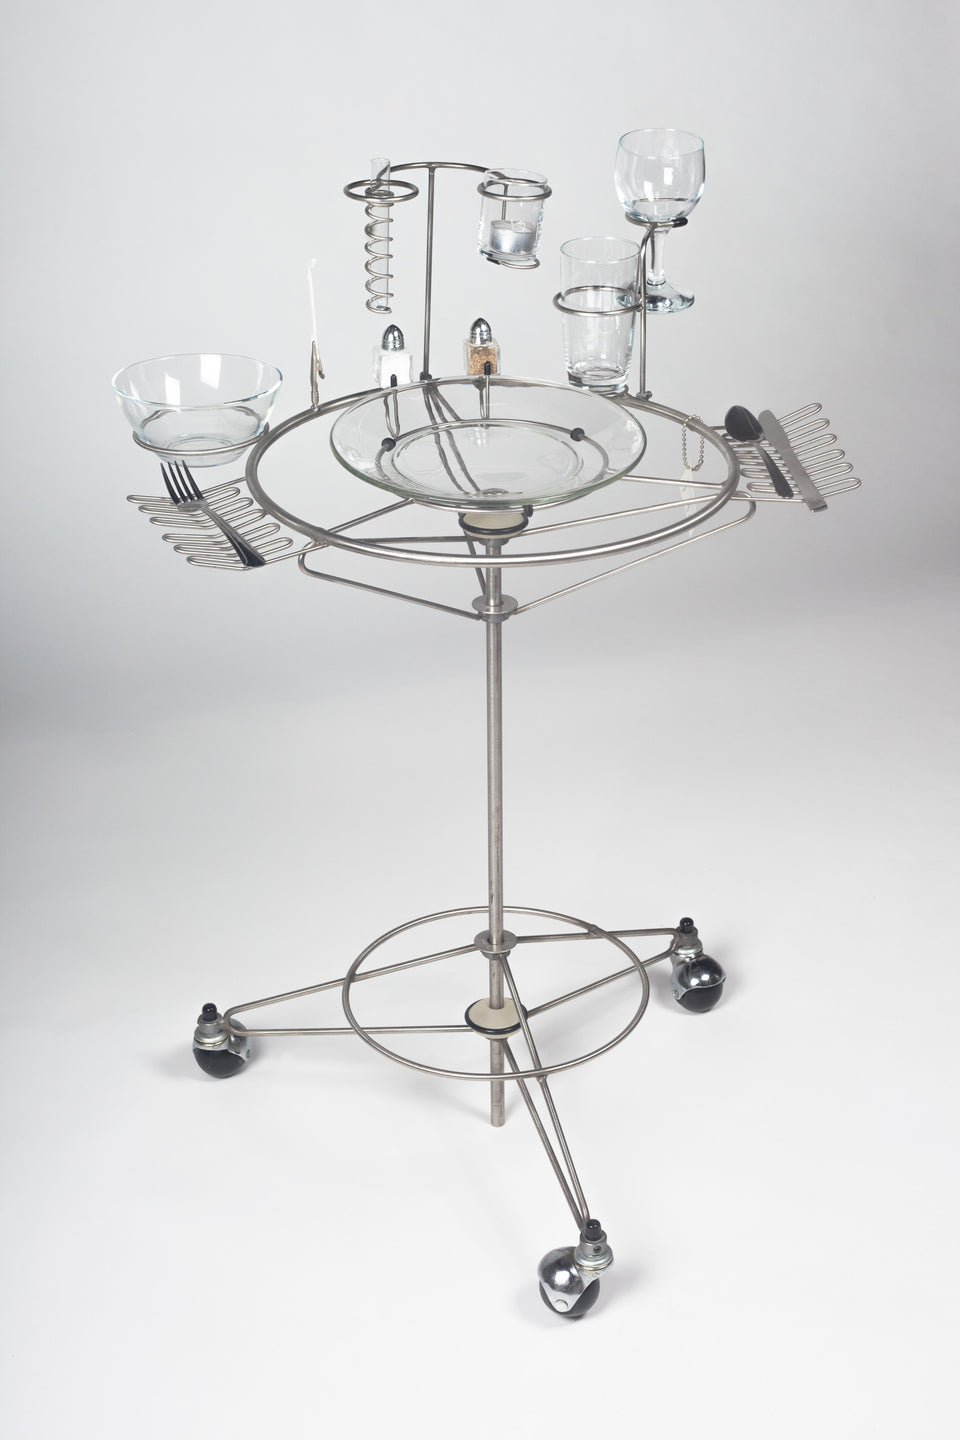 Dining Cart, Virtual Diner by JOEY MANIC, USA, 1990s